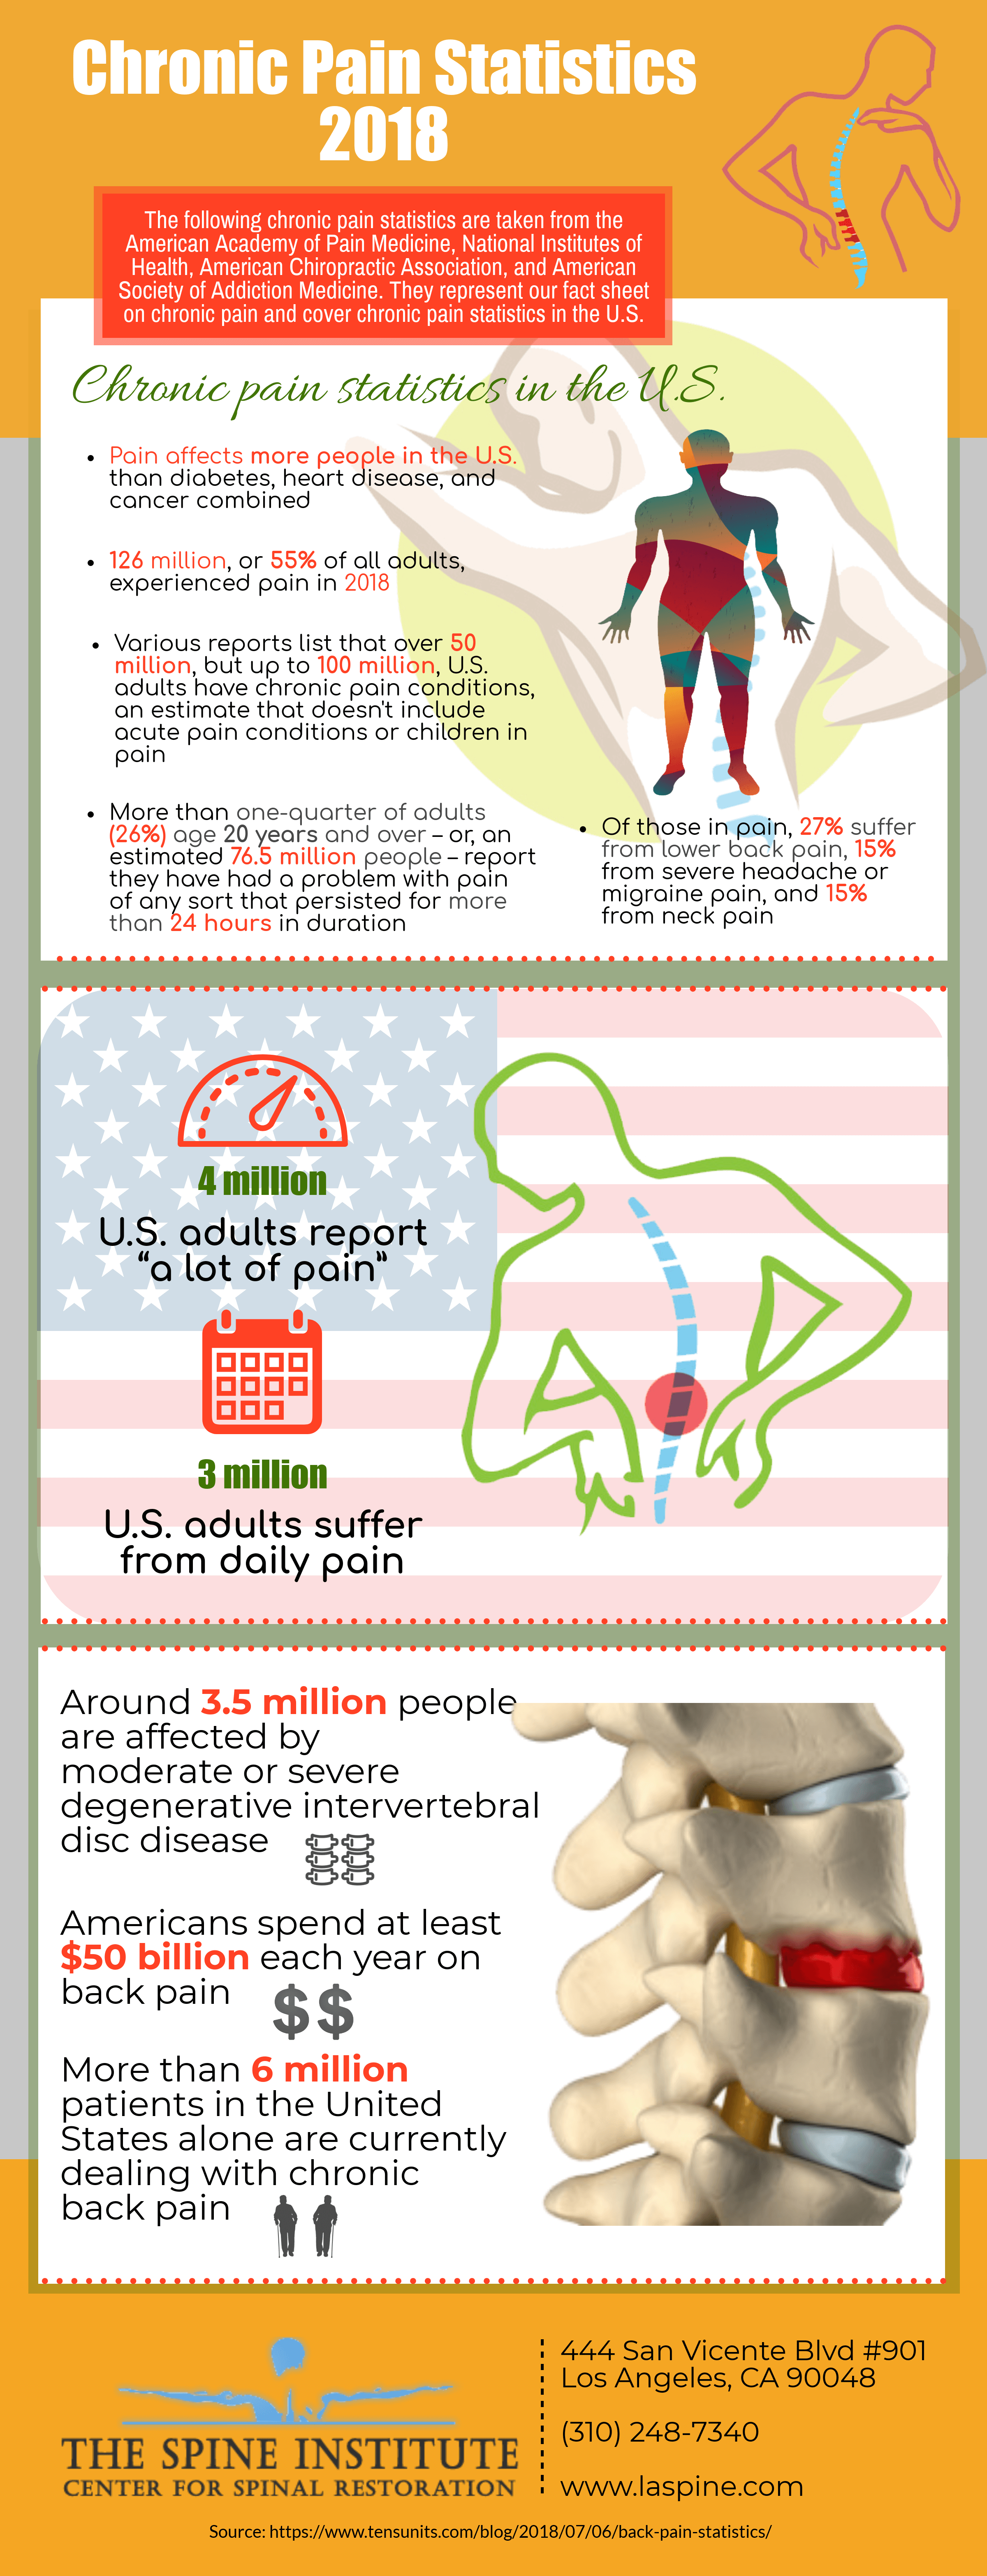 Important 2018 Statistics Related to Chronic Pain [Infographic]